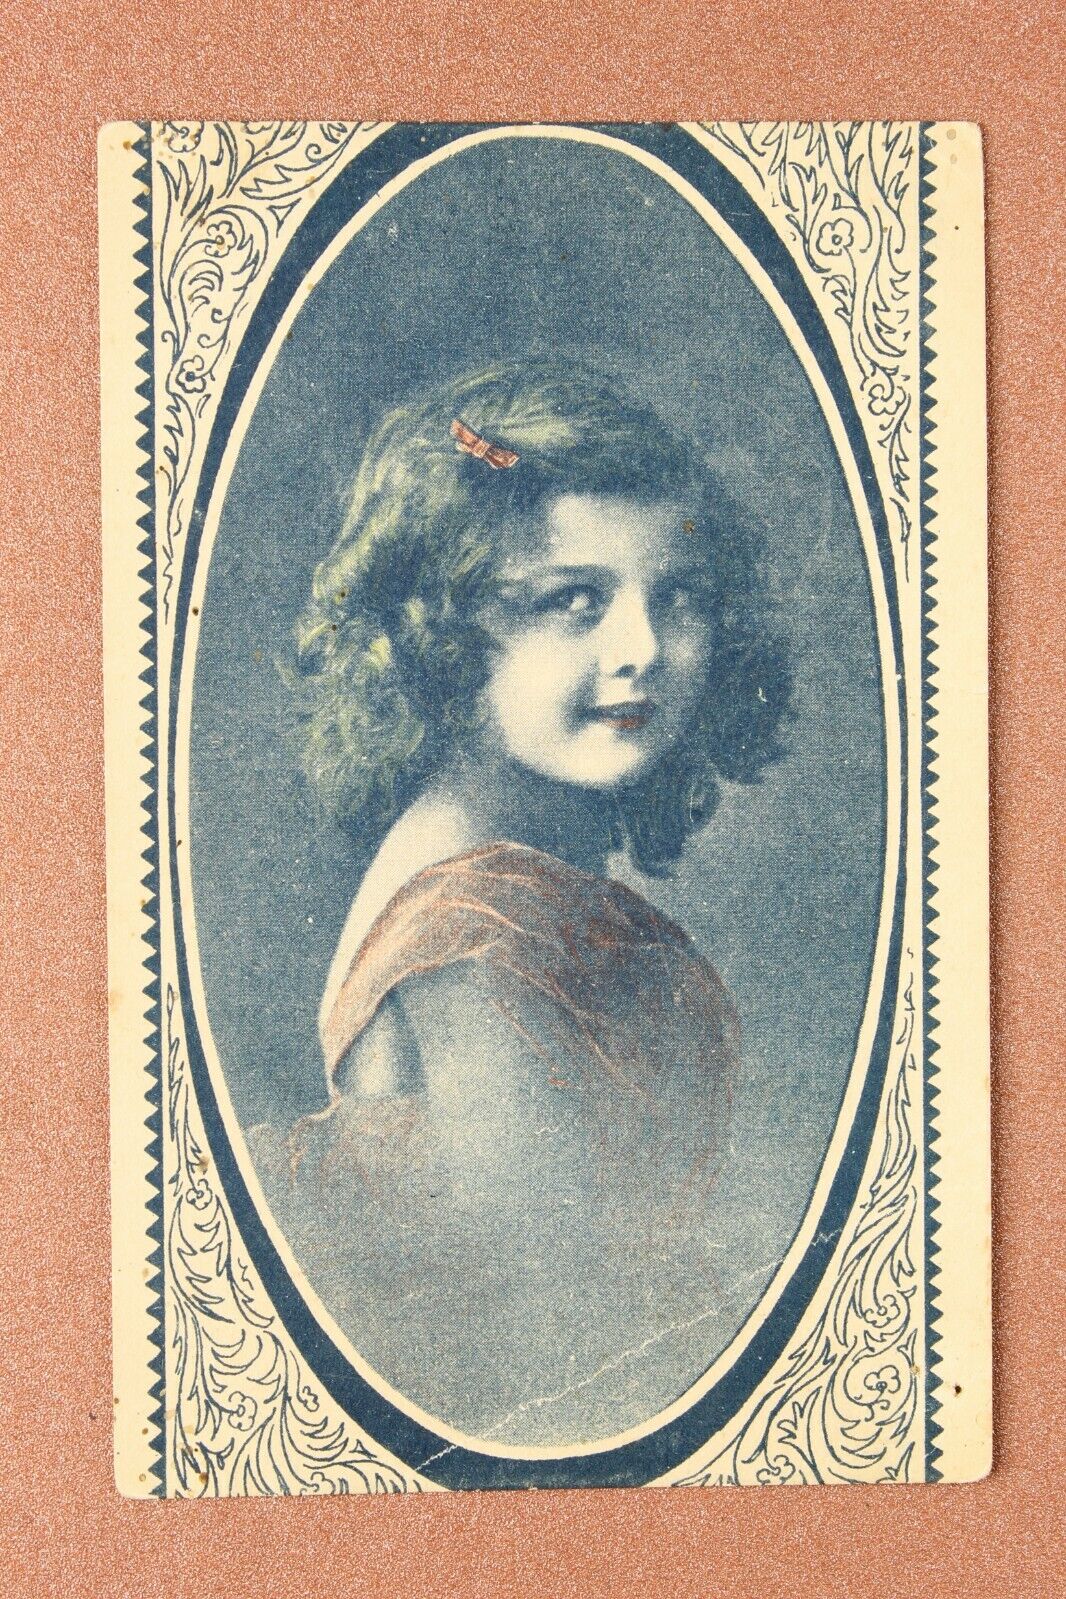 Charming curly girl MODEL REINWALD. RARE Antique postcard (no photo) 1910s🌺